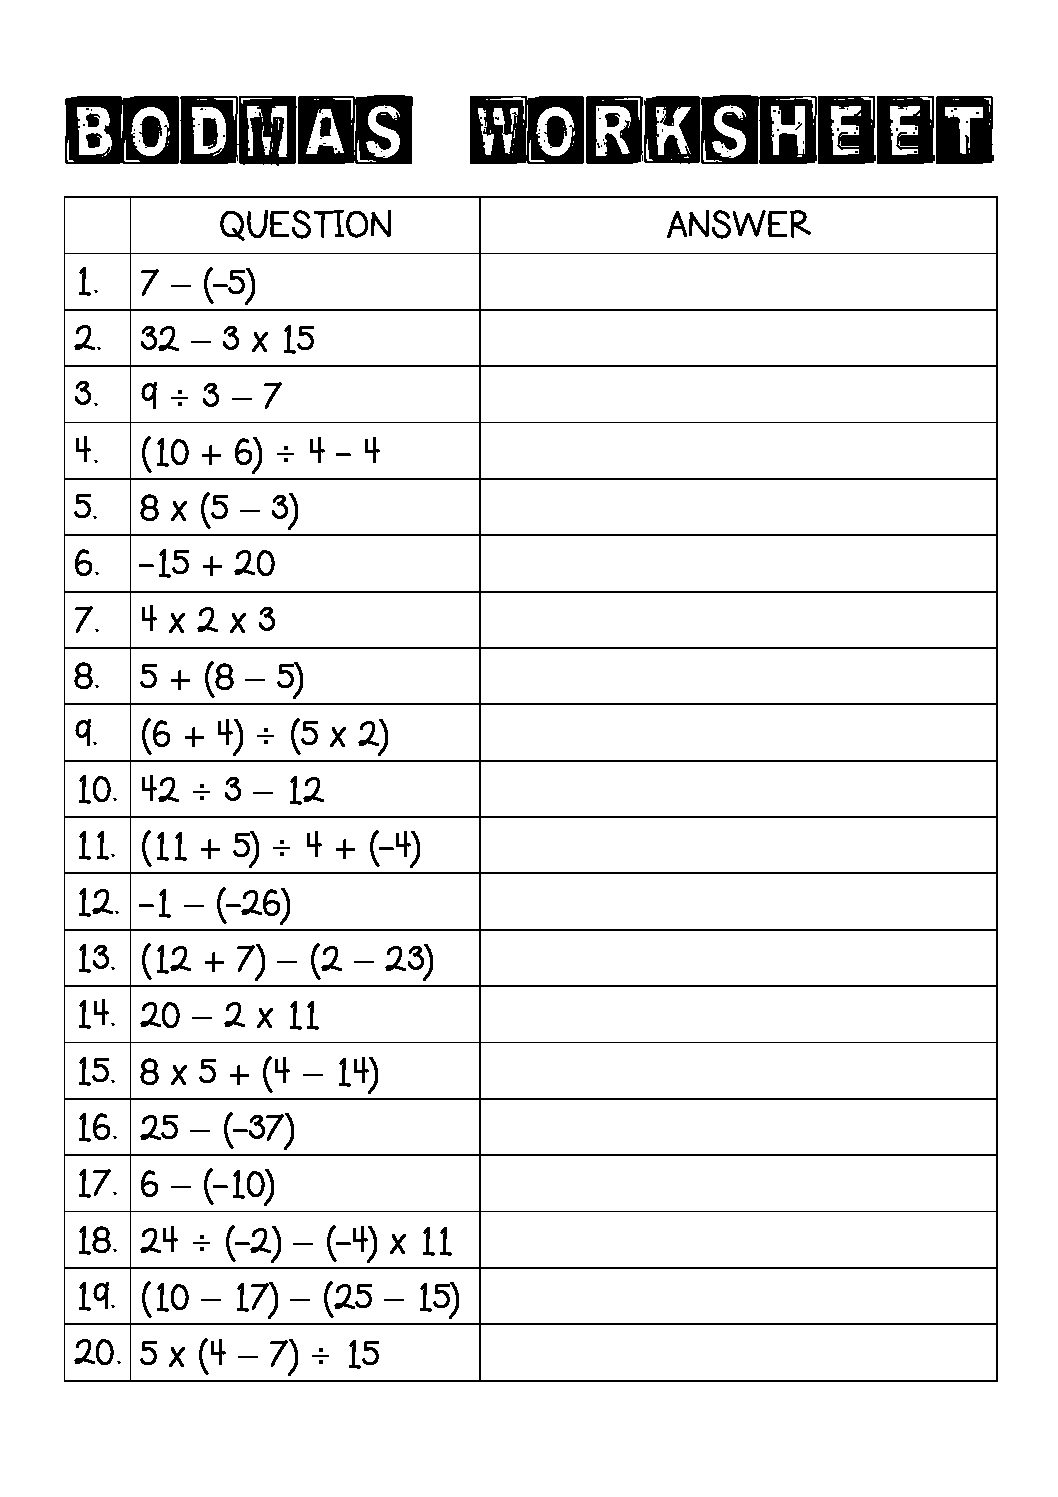 bodmas grade 5 worksheet with answers